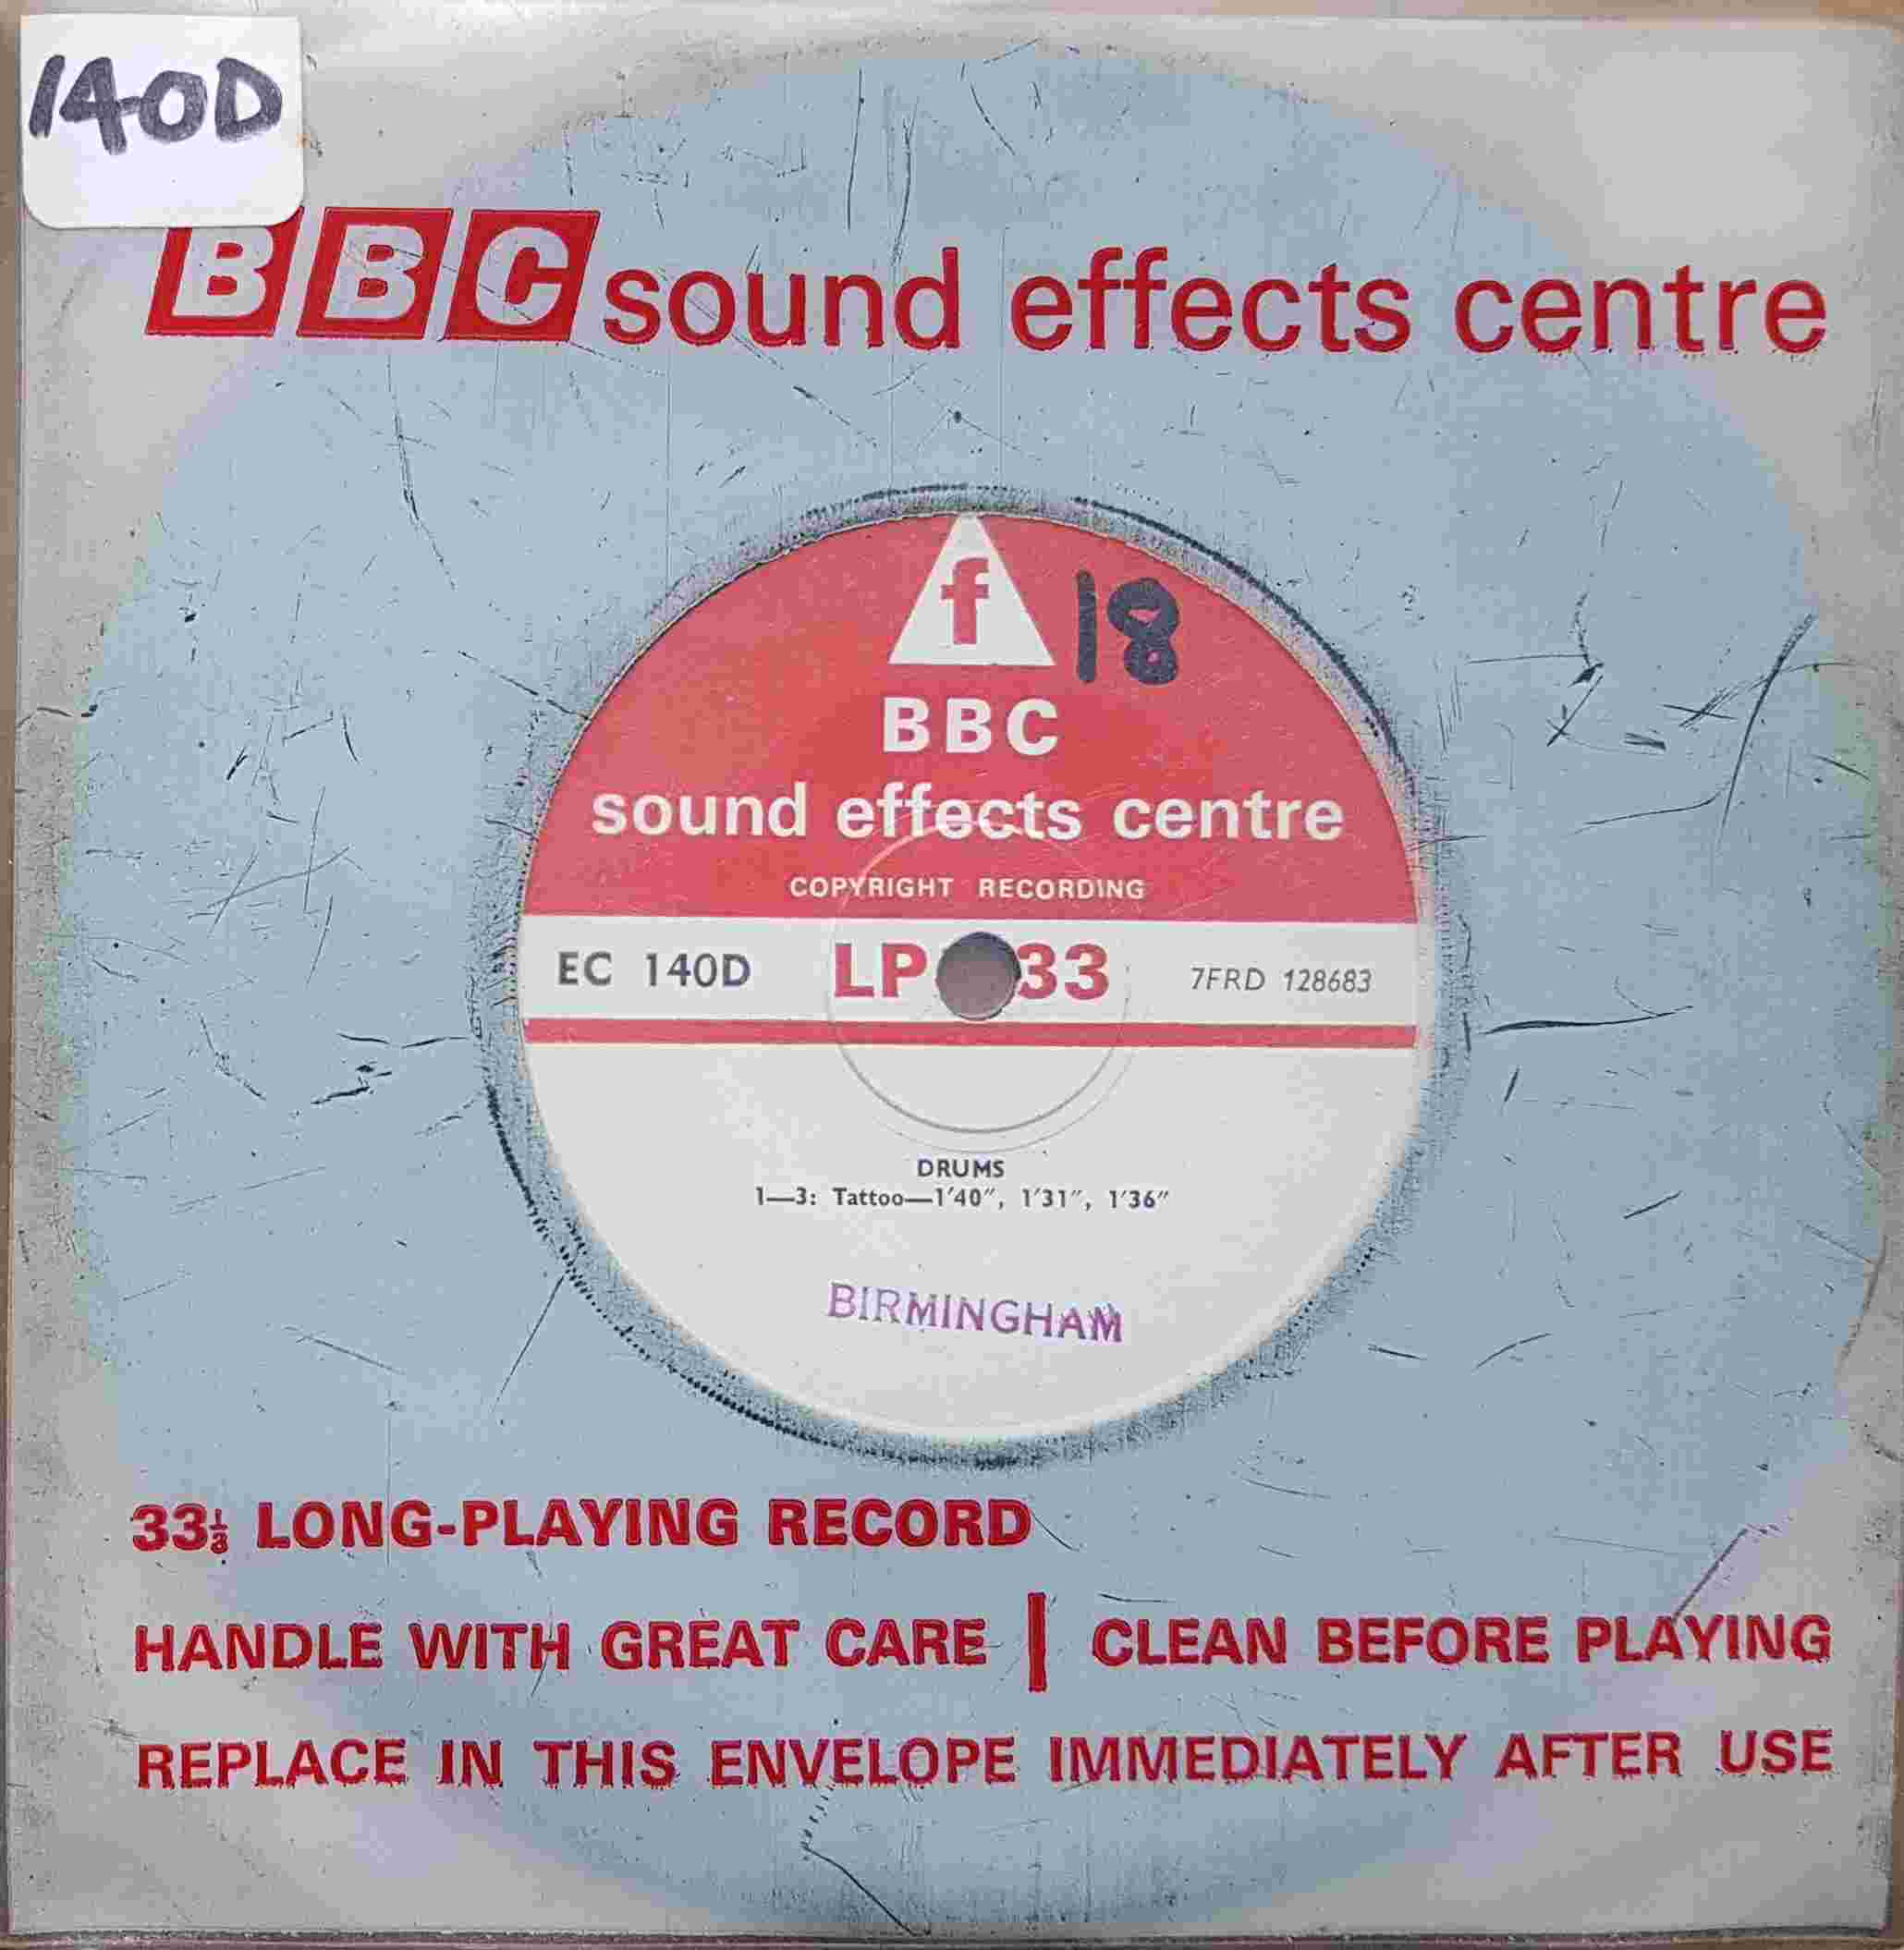 Picture of EC 140D Drums by artist Not registered from the BBC records and Tapes library